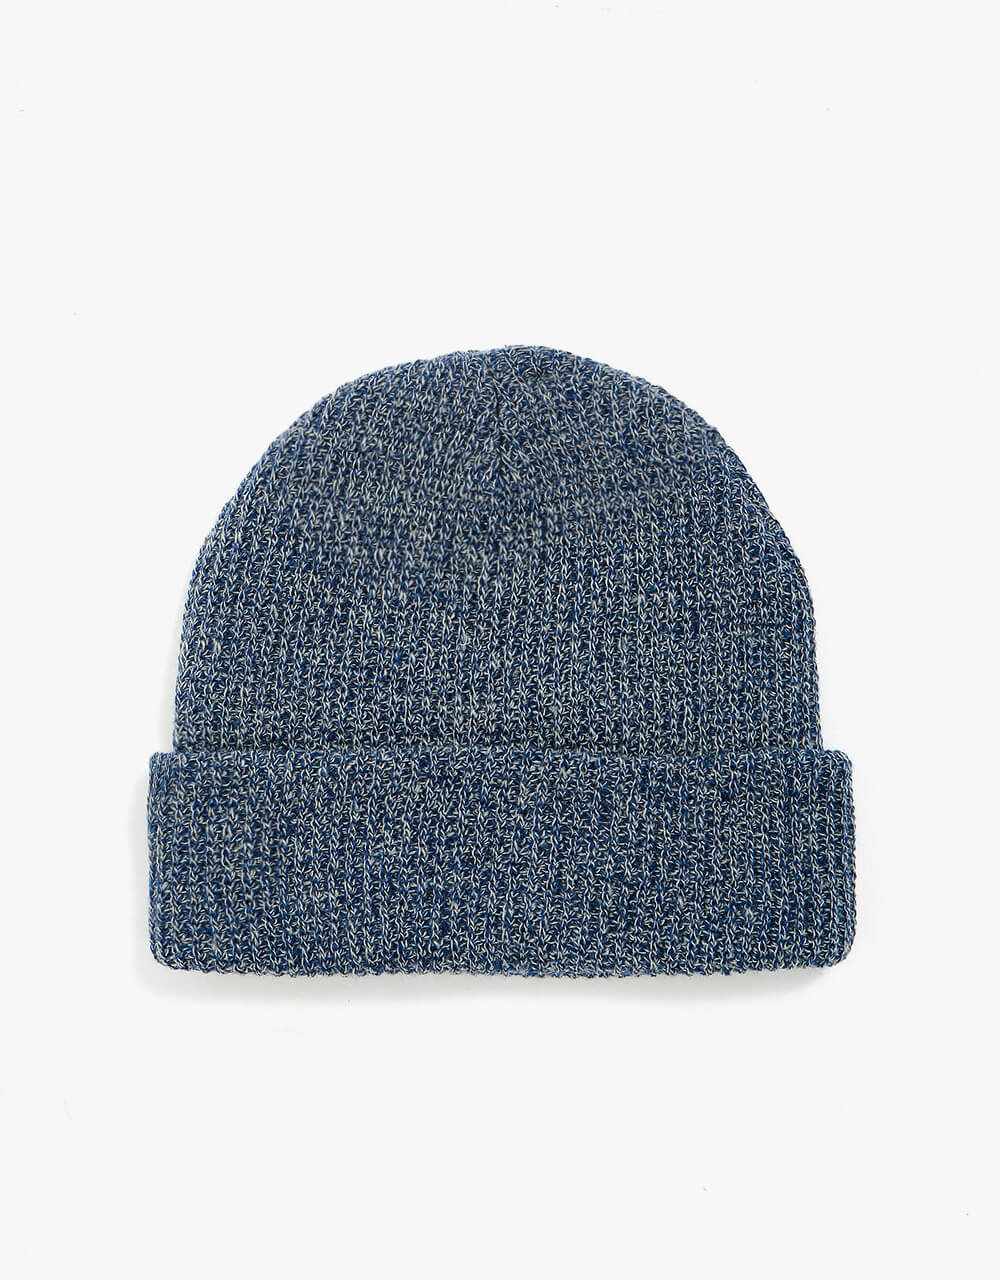 Route One Fisherman Beanie - Heather Blue